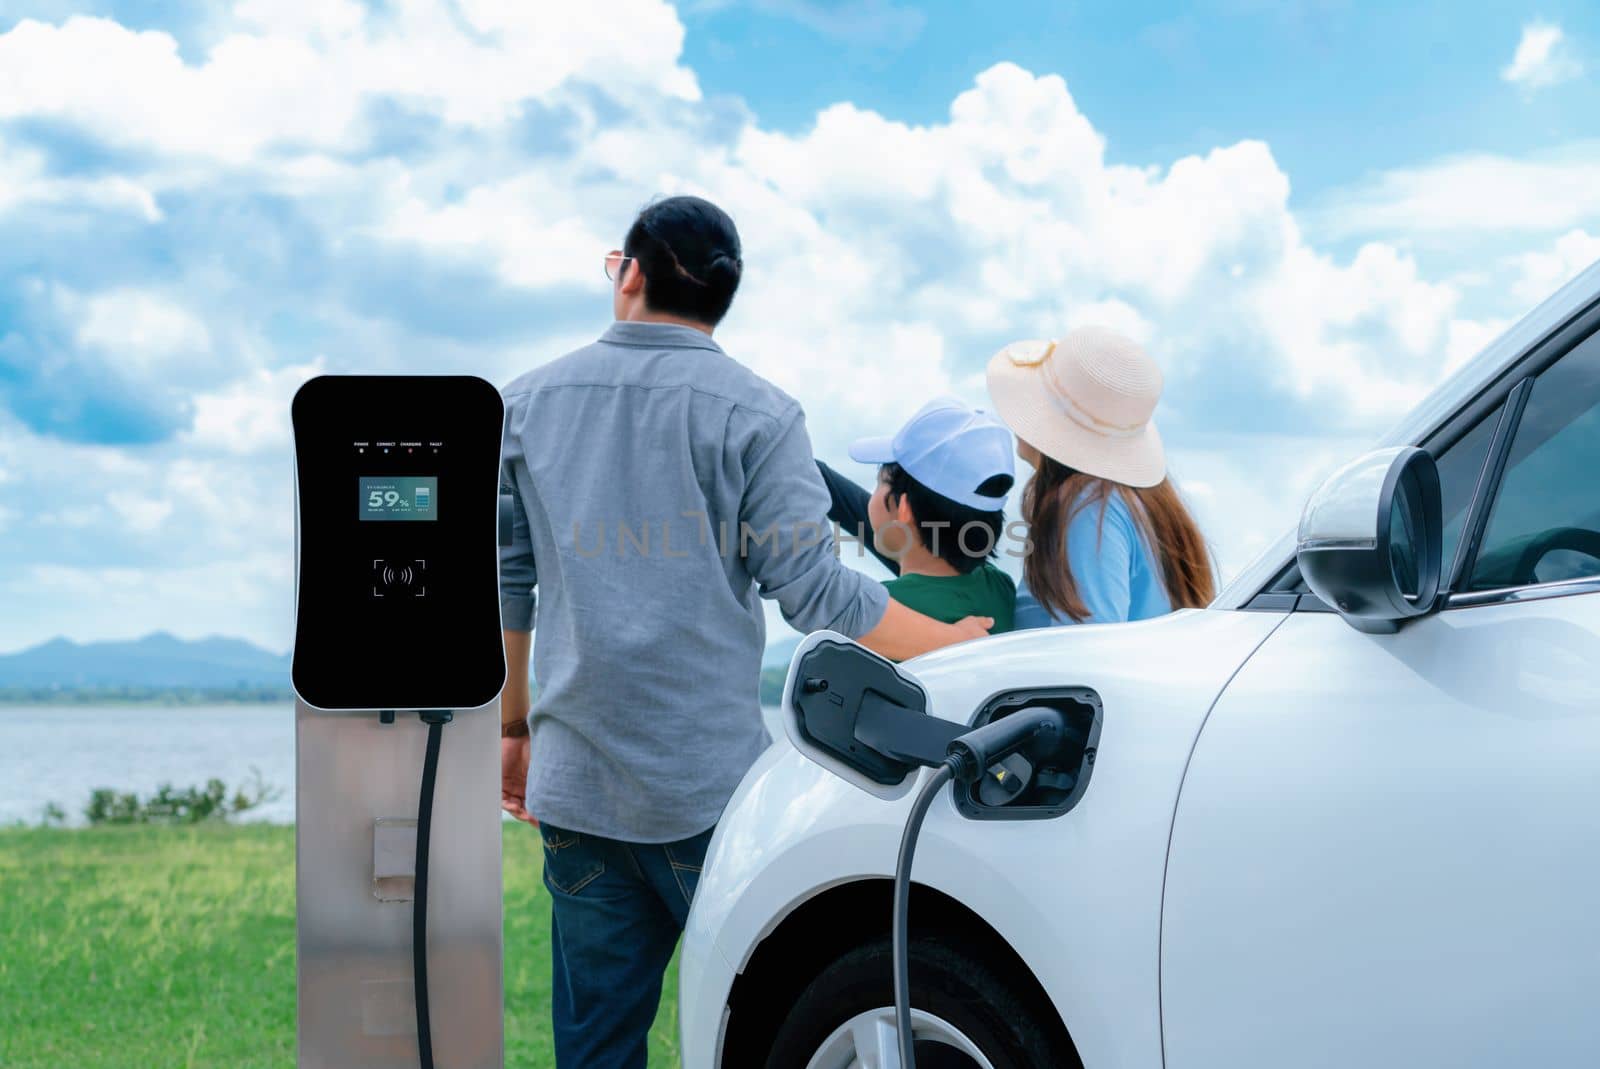 Concept of progressive happy family with electric vehicle enjoy their time at natural outdoor scenic with lake, greenfield and cloudscape background. Electric vehicle driven by green renewable energy.